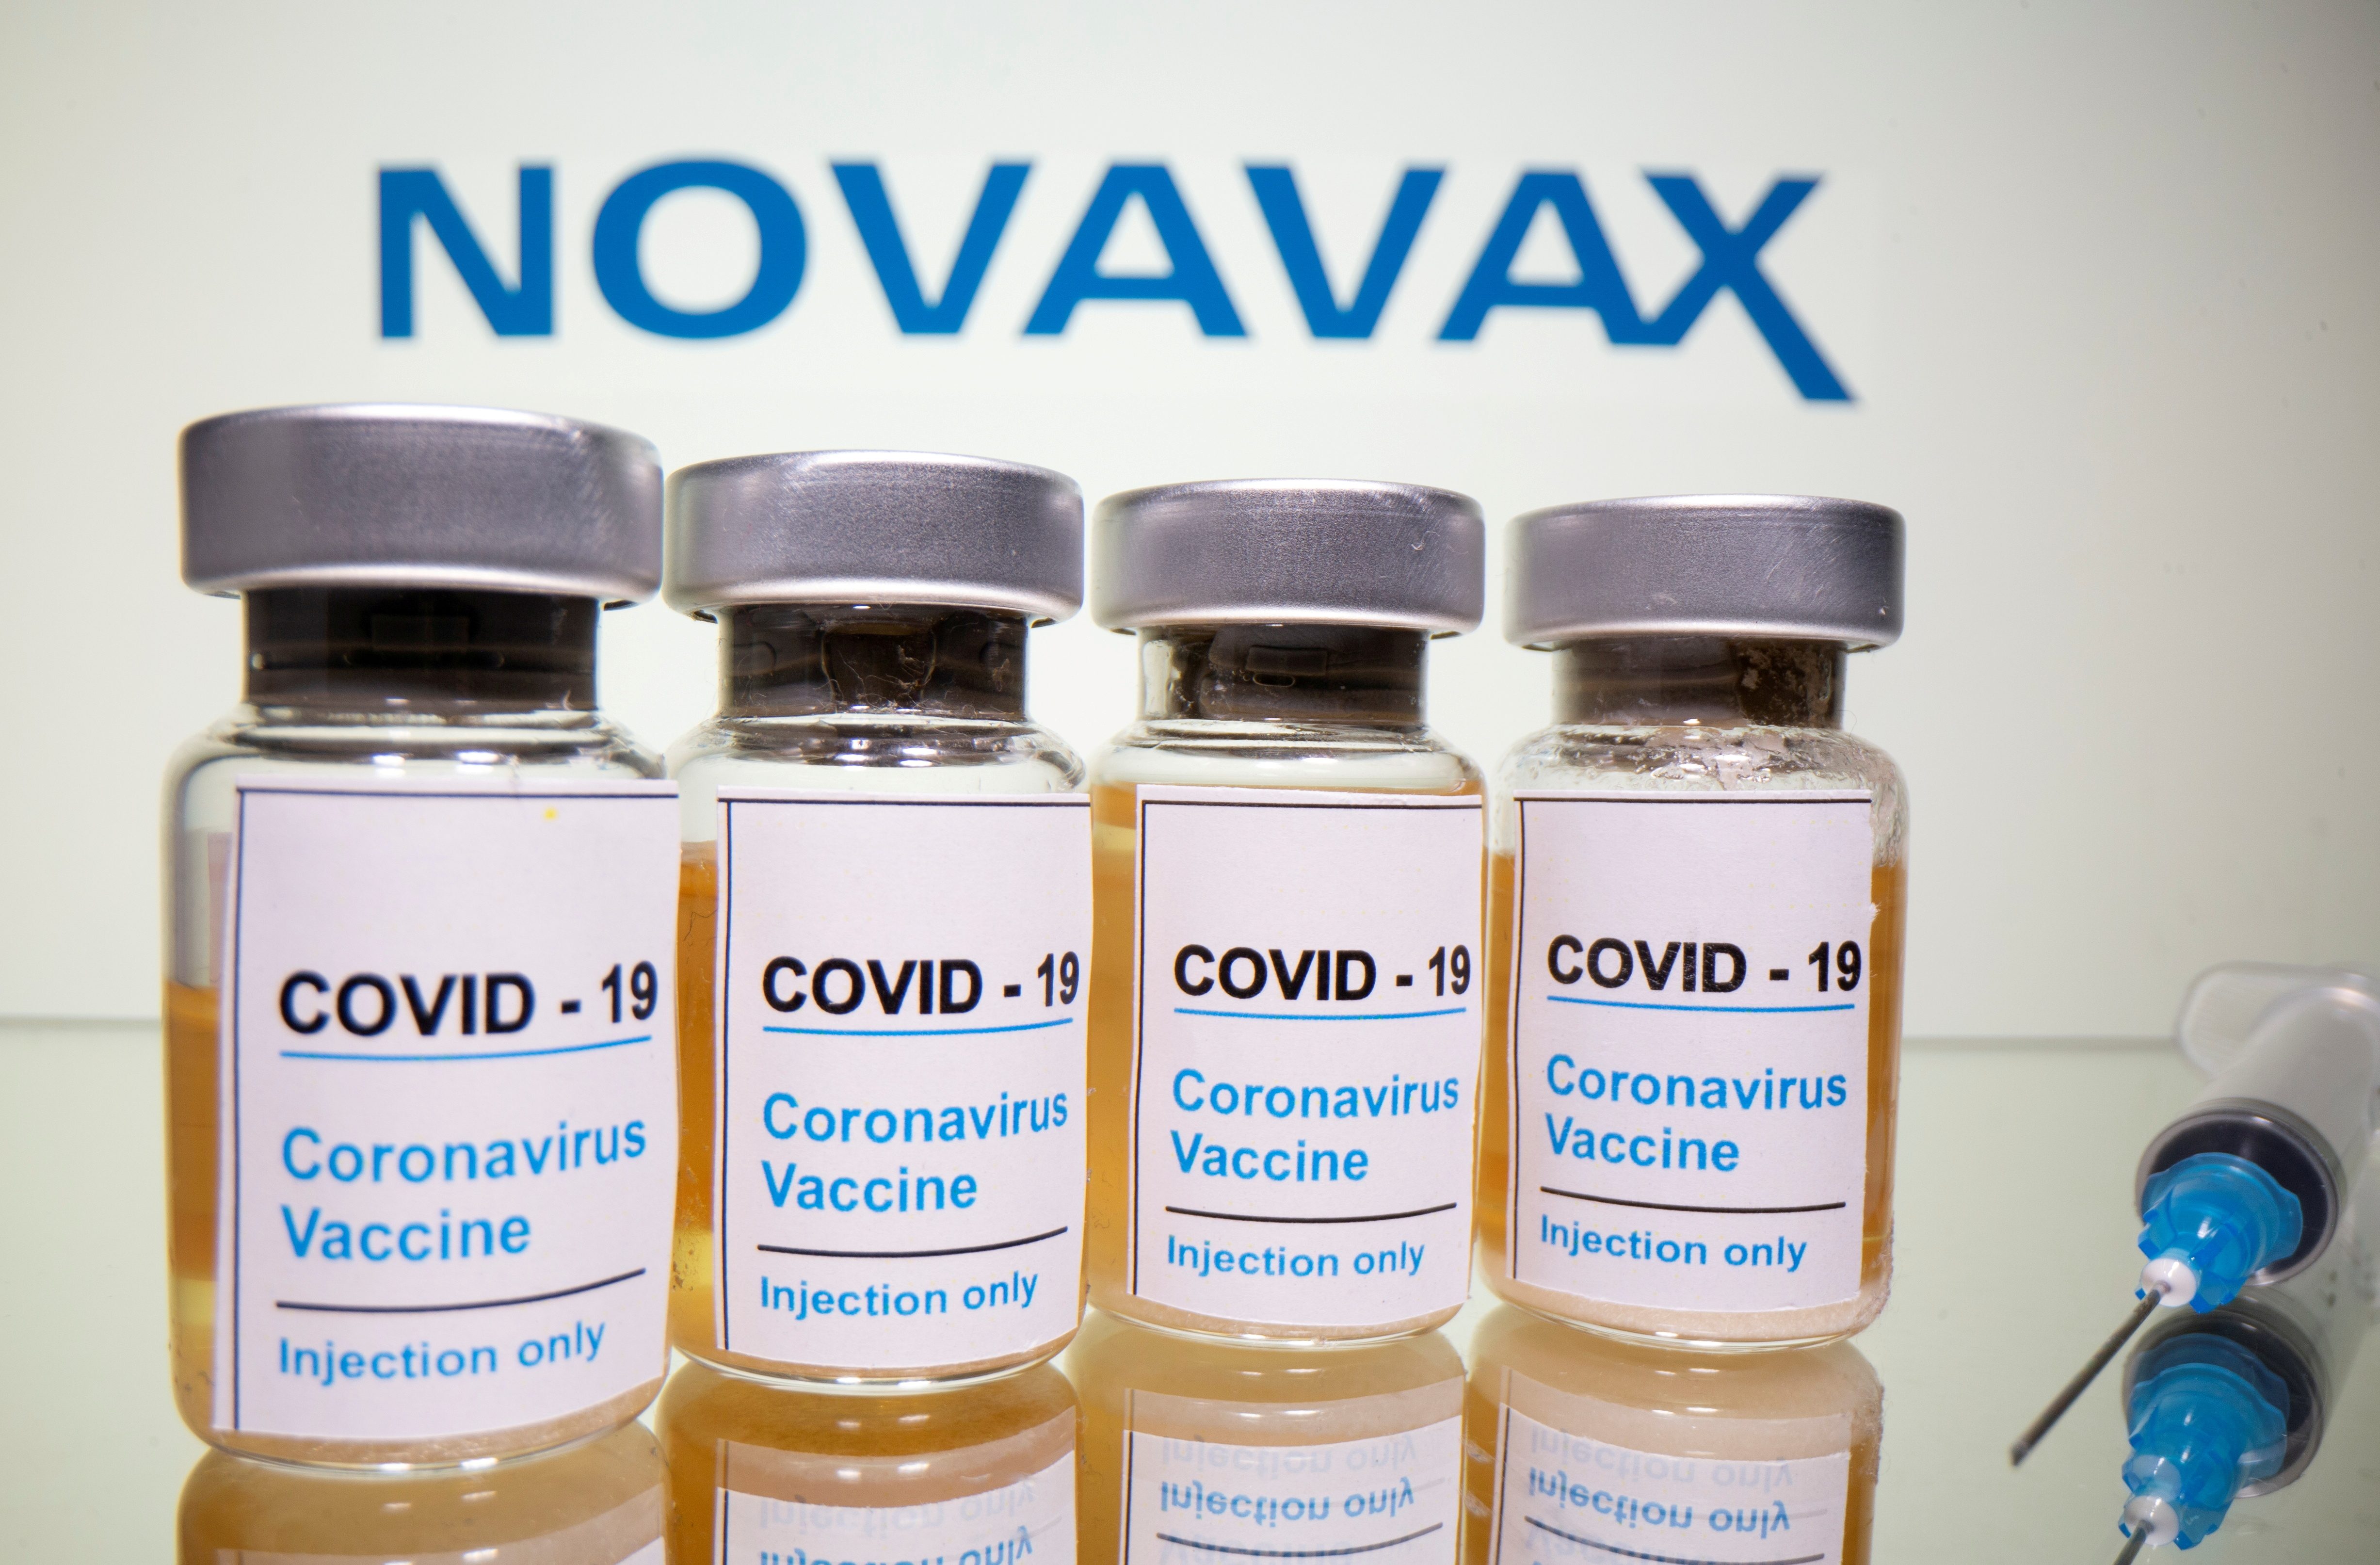 Novavax applies to WHO for emergency listing of COVID-19 vaccine